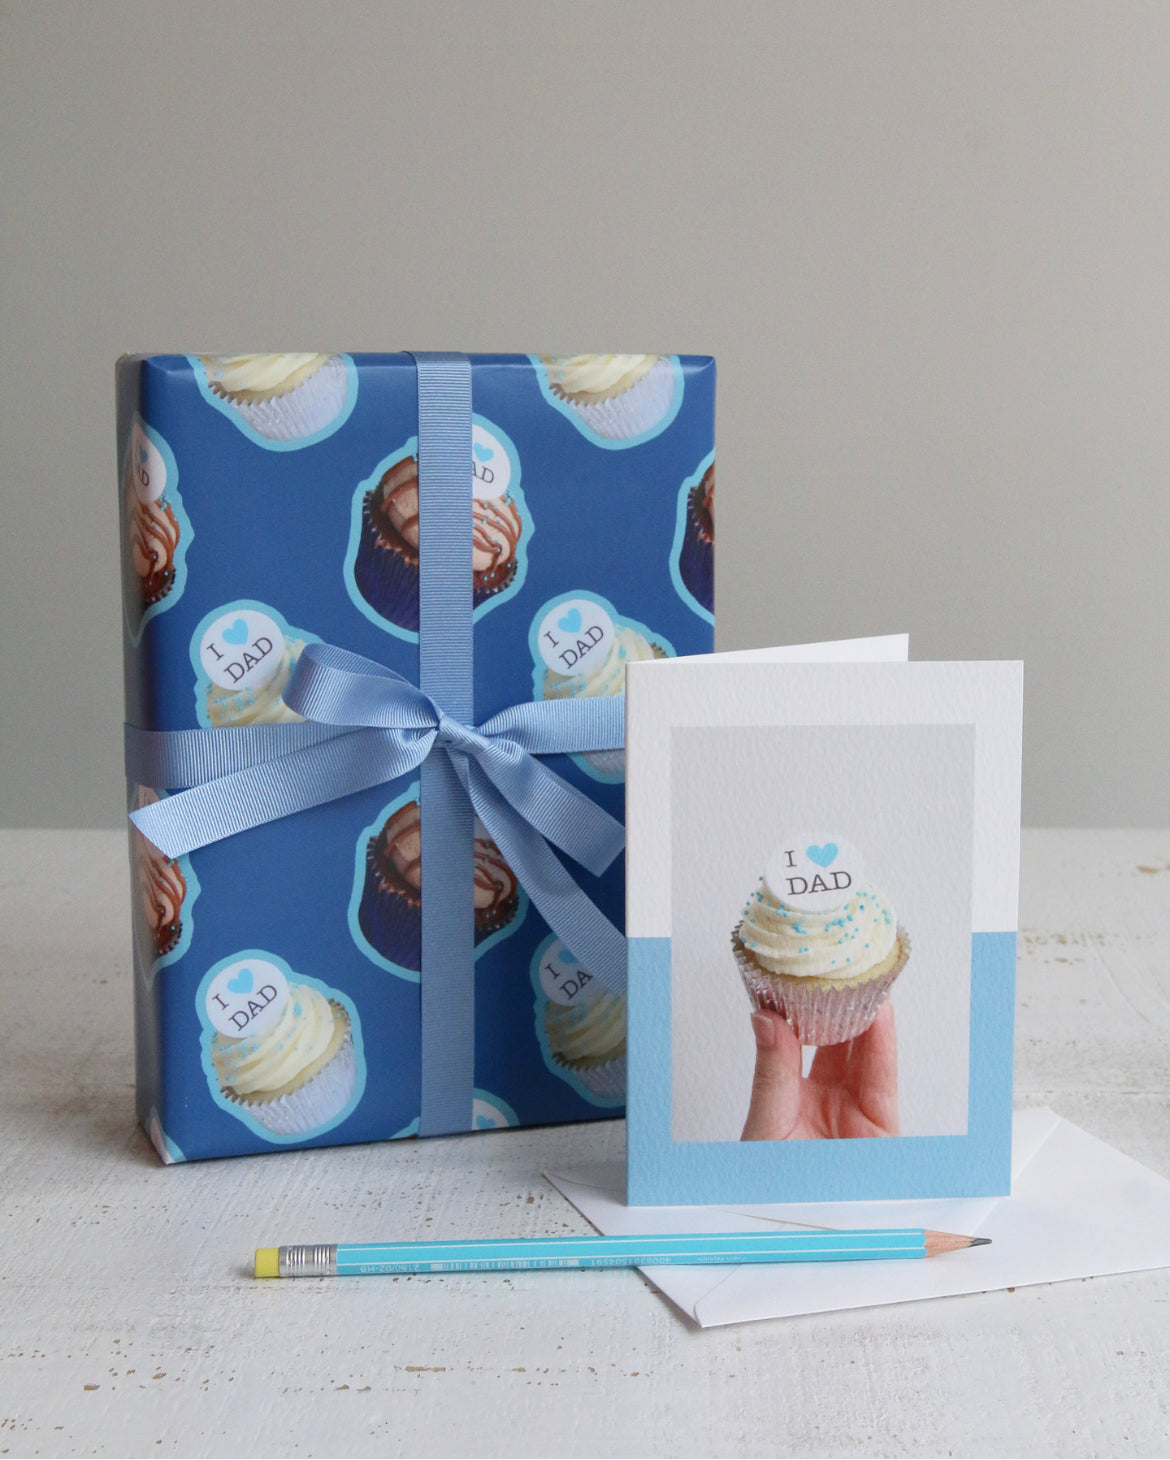 "I Heart Dad" Card & Wrapping Paper